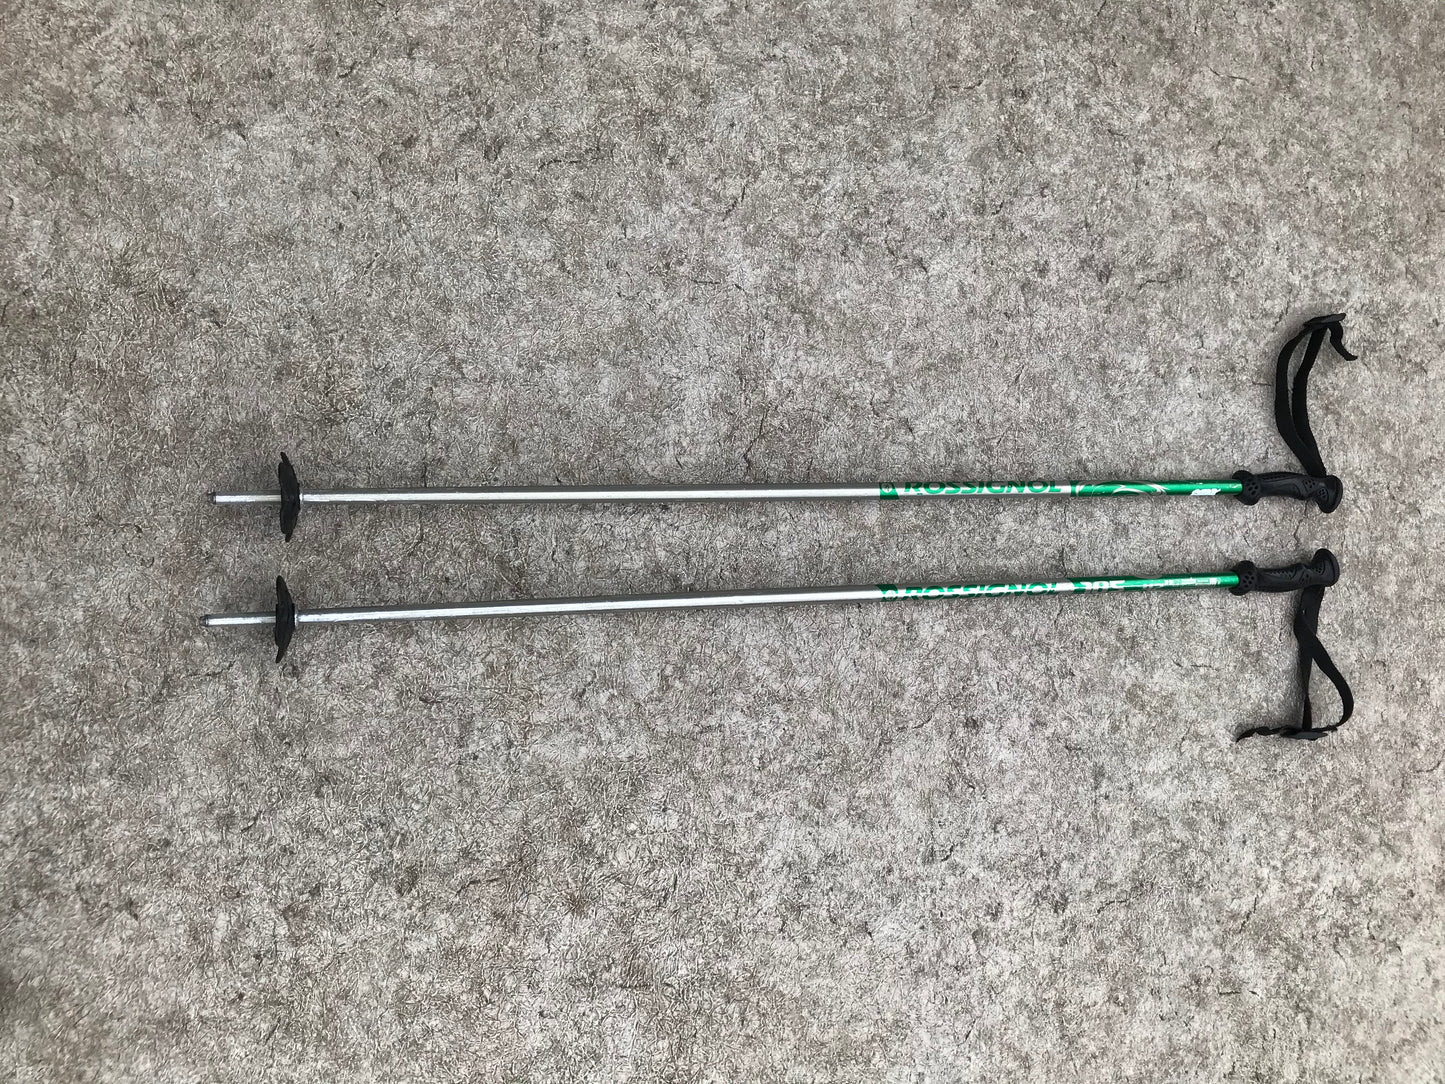 Ski Poles Child Size 41 inch Rossignol Chrome and Green With Rubber Grips